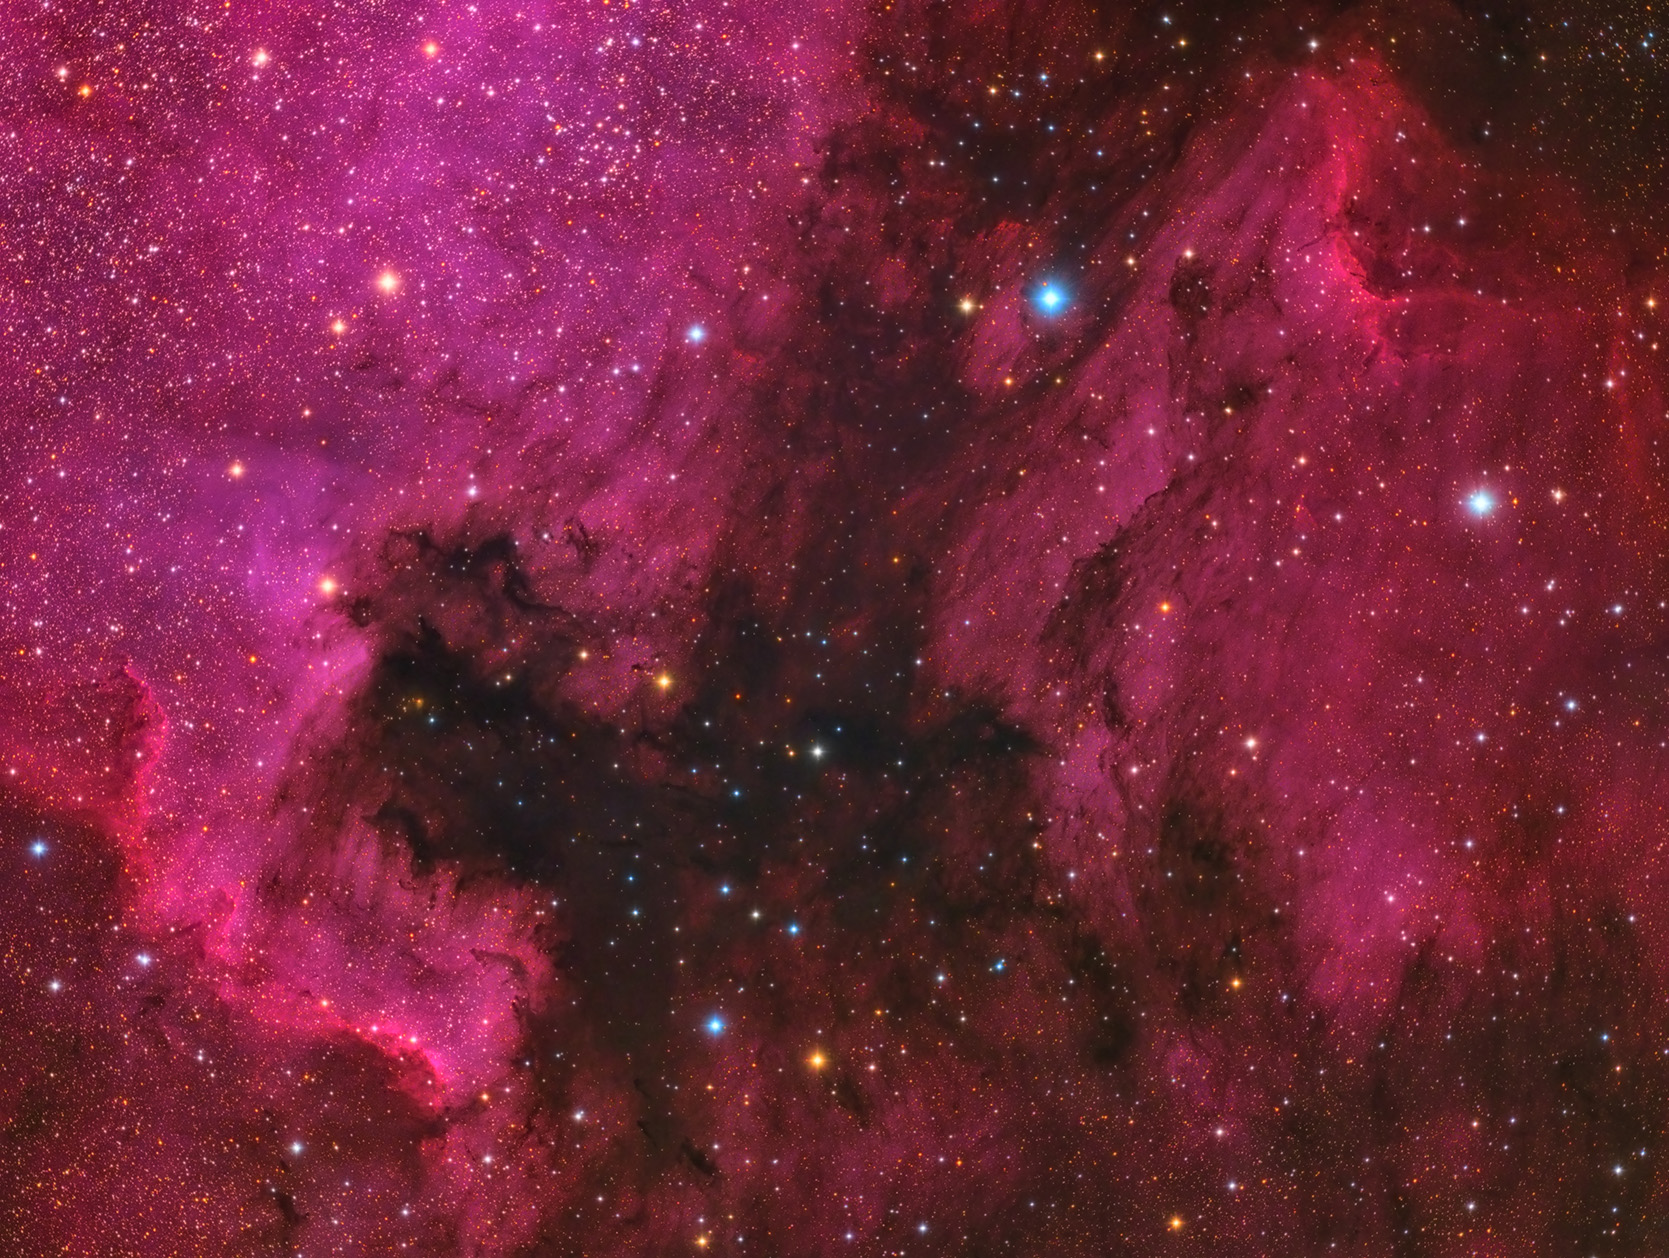 NGC 7000, IC 5070 and IC 5068 nebulae: 794 KB; click on the image to enlarge